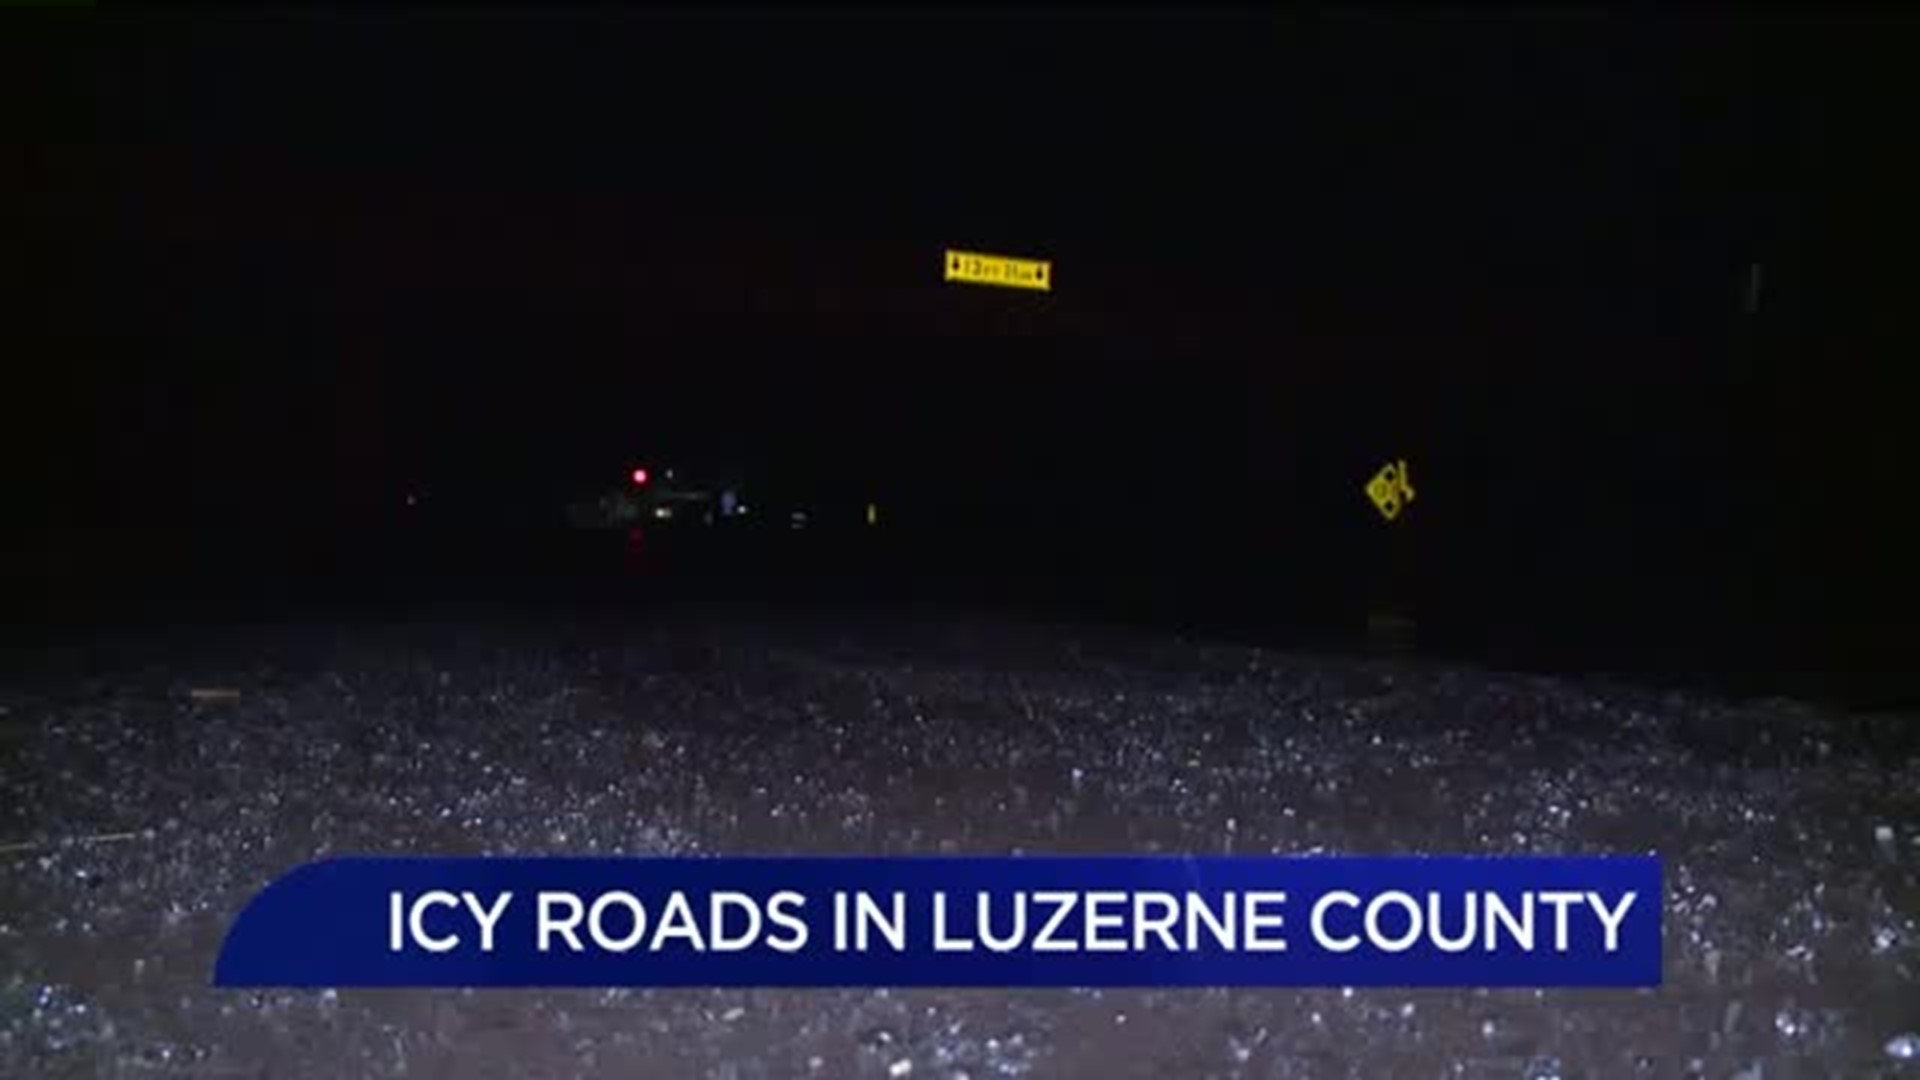 Icy Roads in Luzerne County